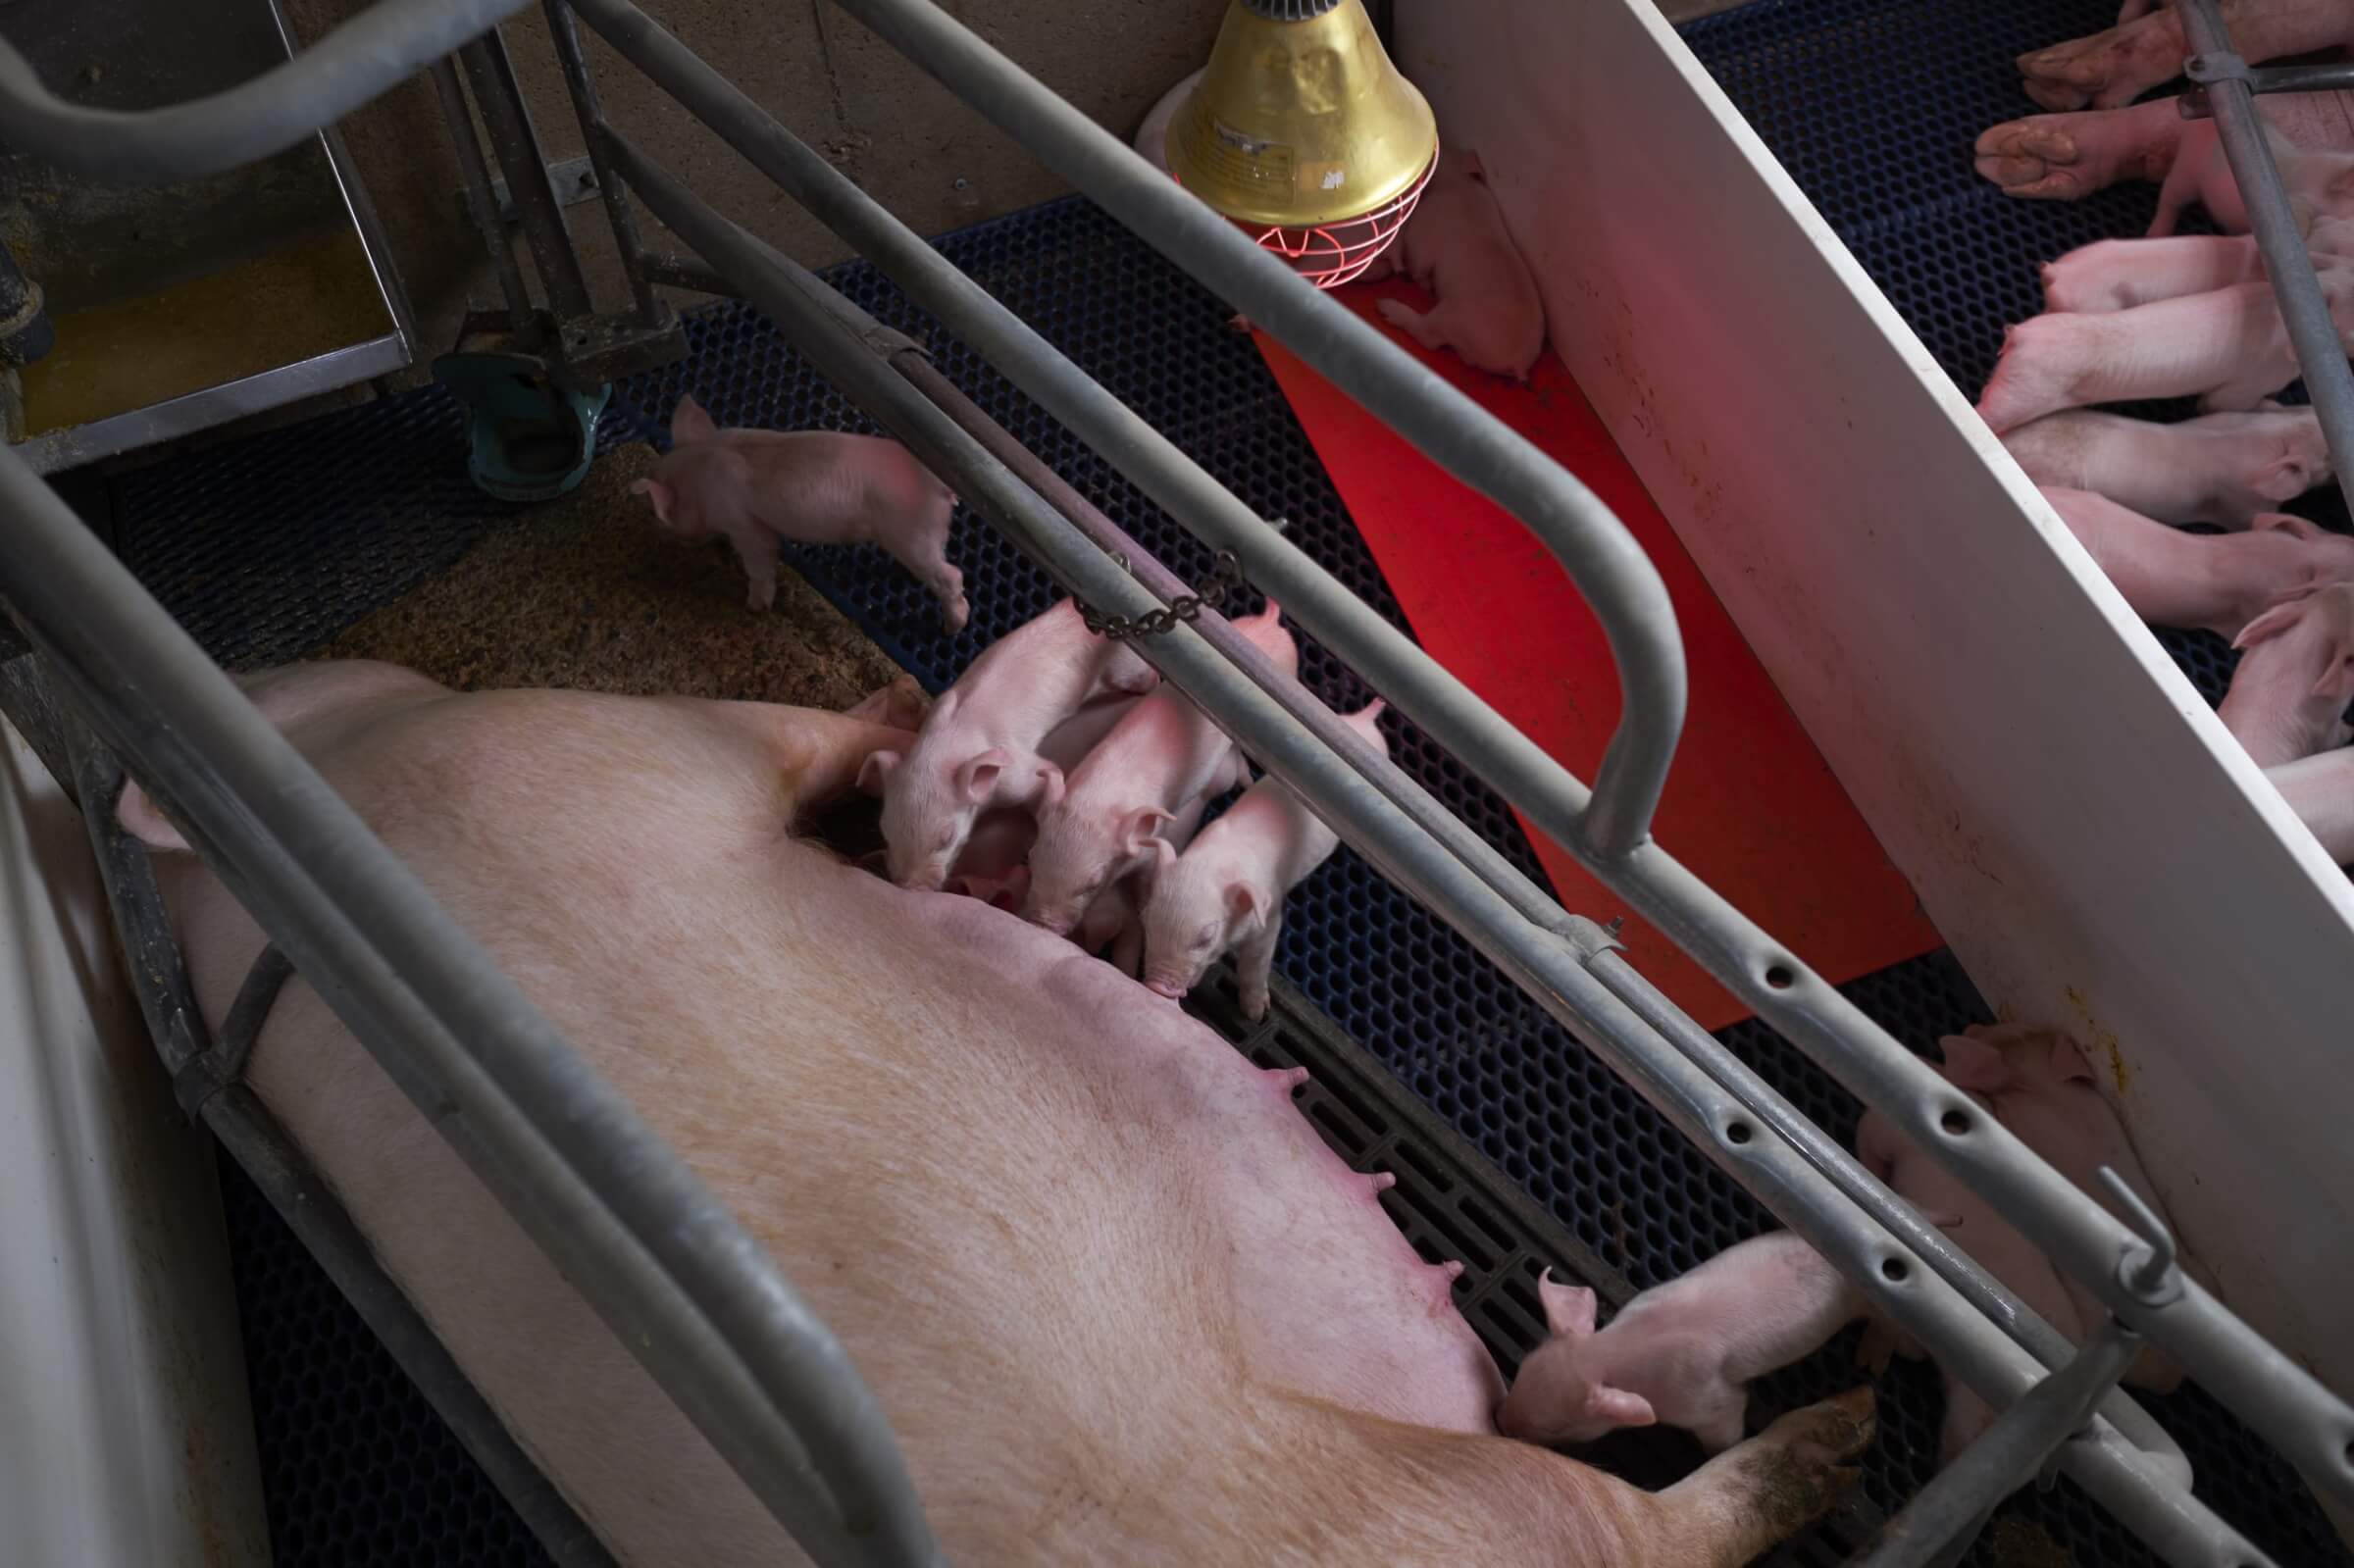 Farrowing crates are used to protect piglets and the sow